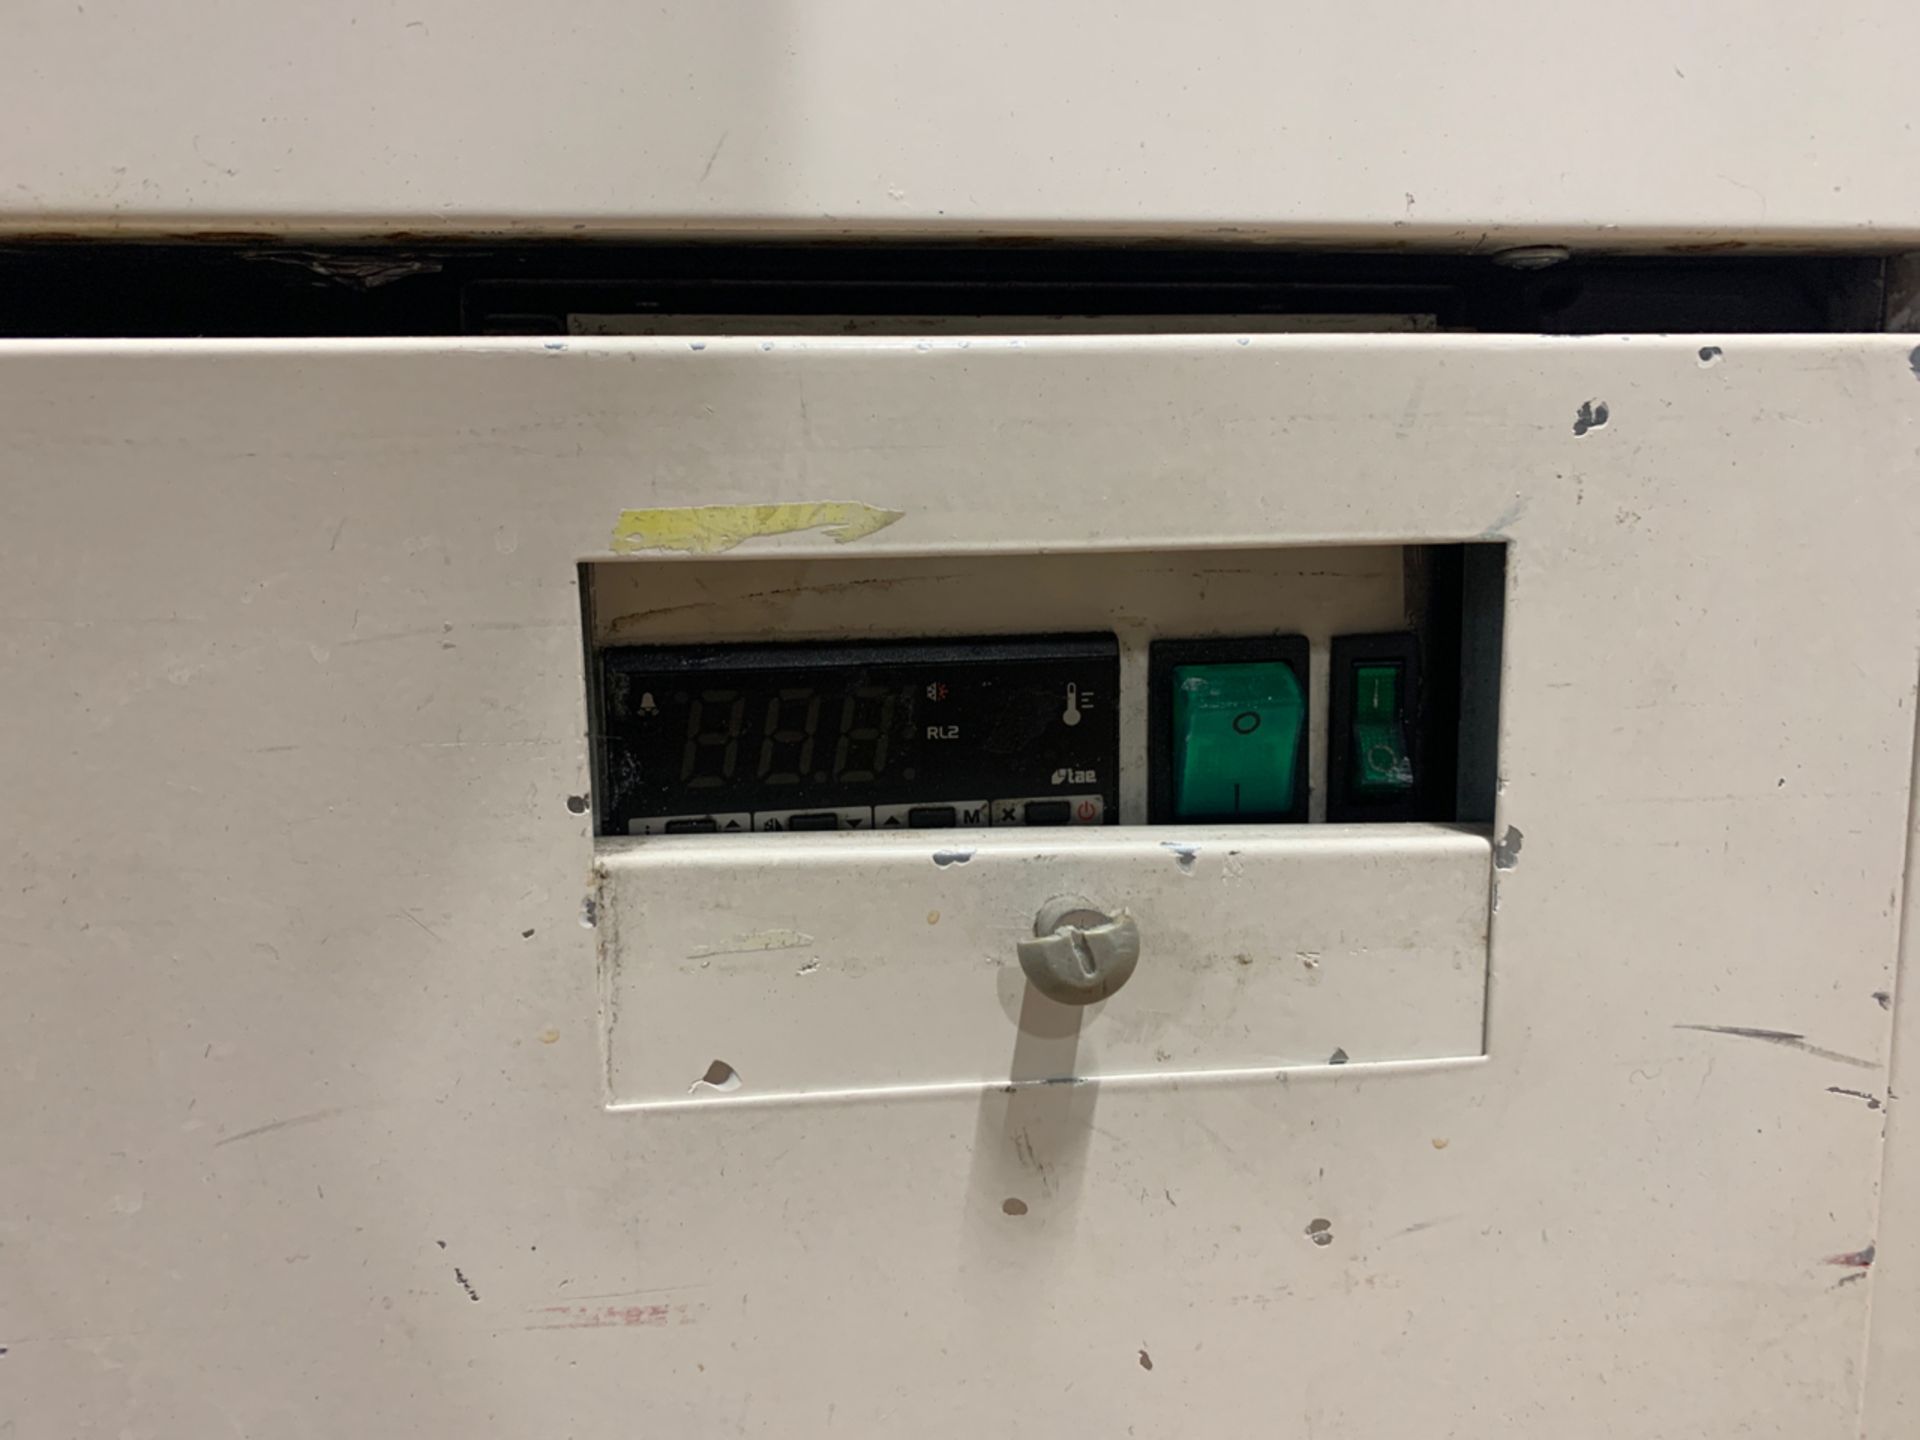 Capital Temperature Controlled Display Unit - Image 3 of 5